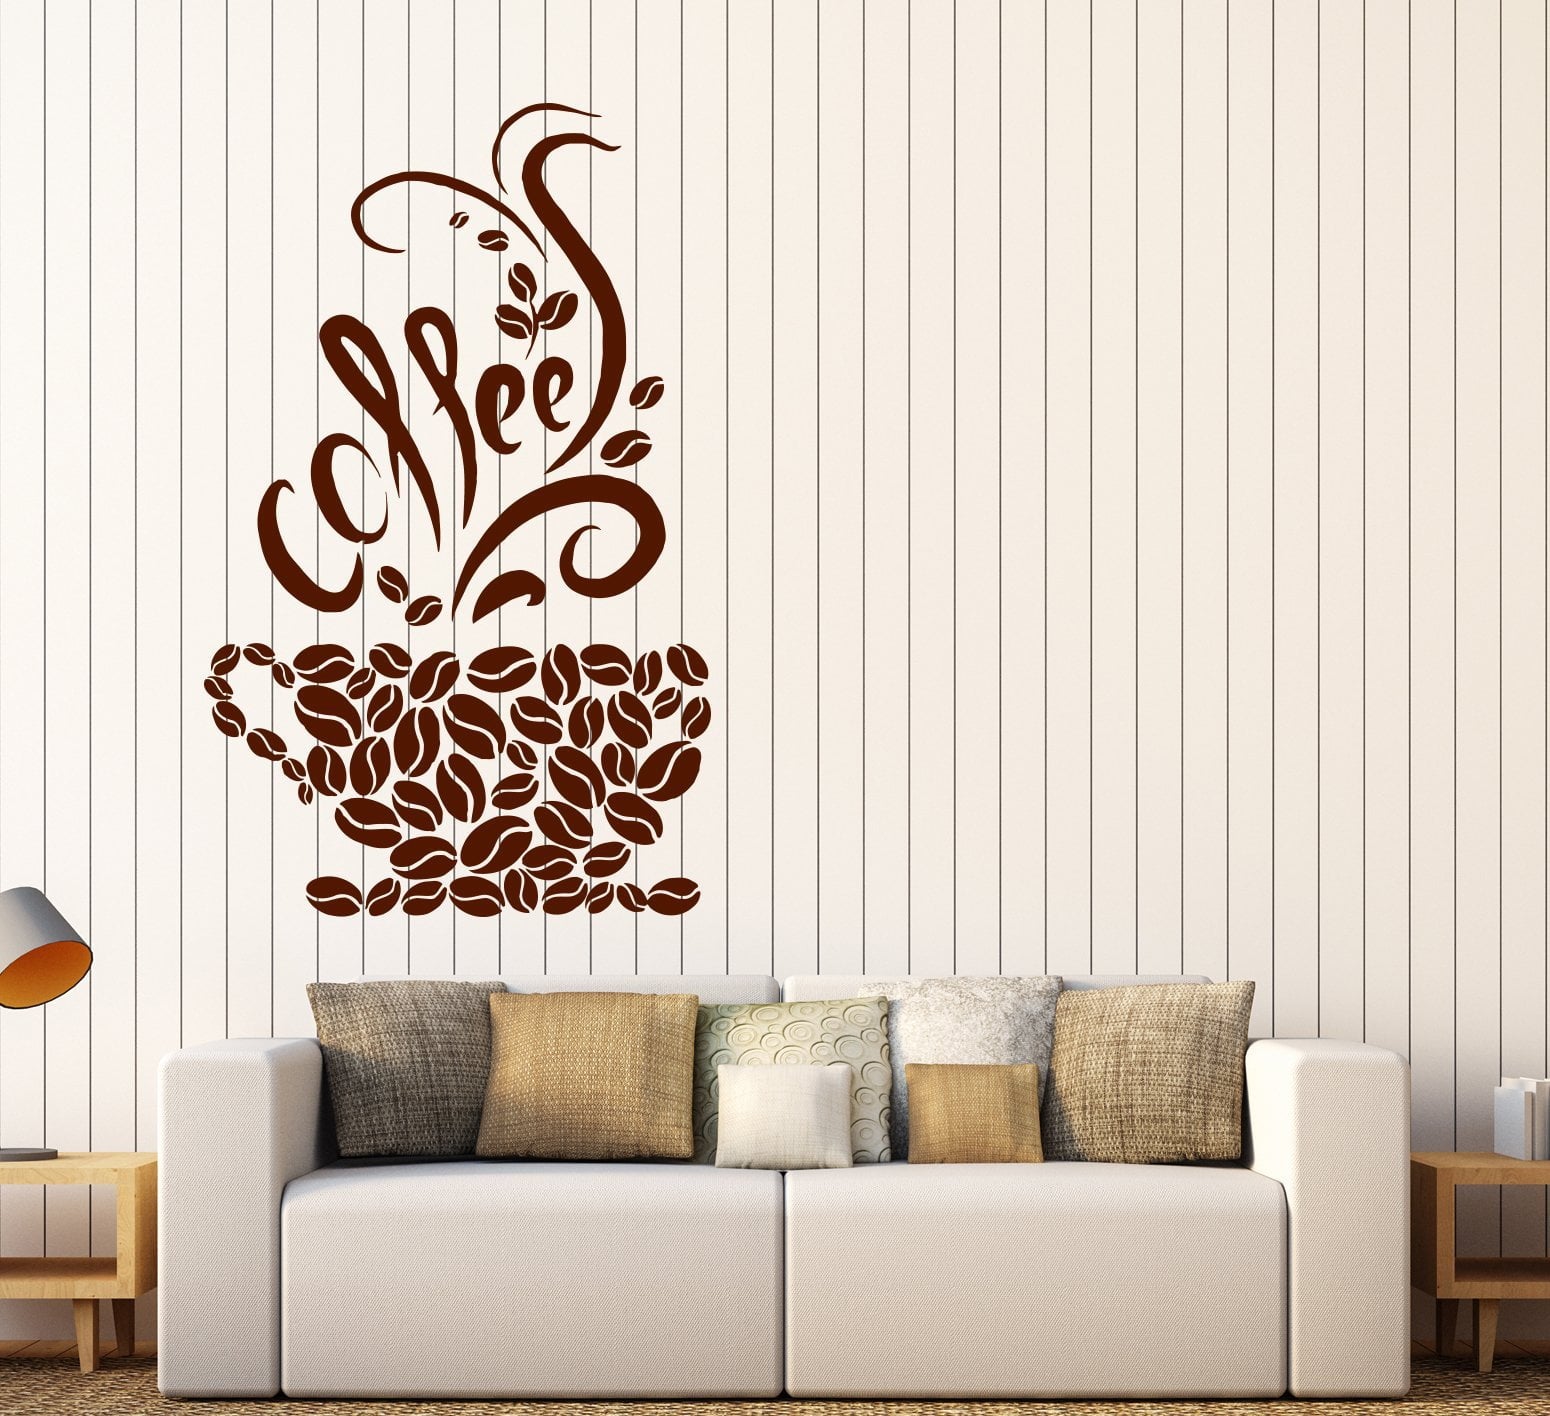 Large Vinyl Decal Coffee Beans Cups Kitchen Pub Restaurant Decor — Wallstickers4you